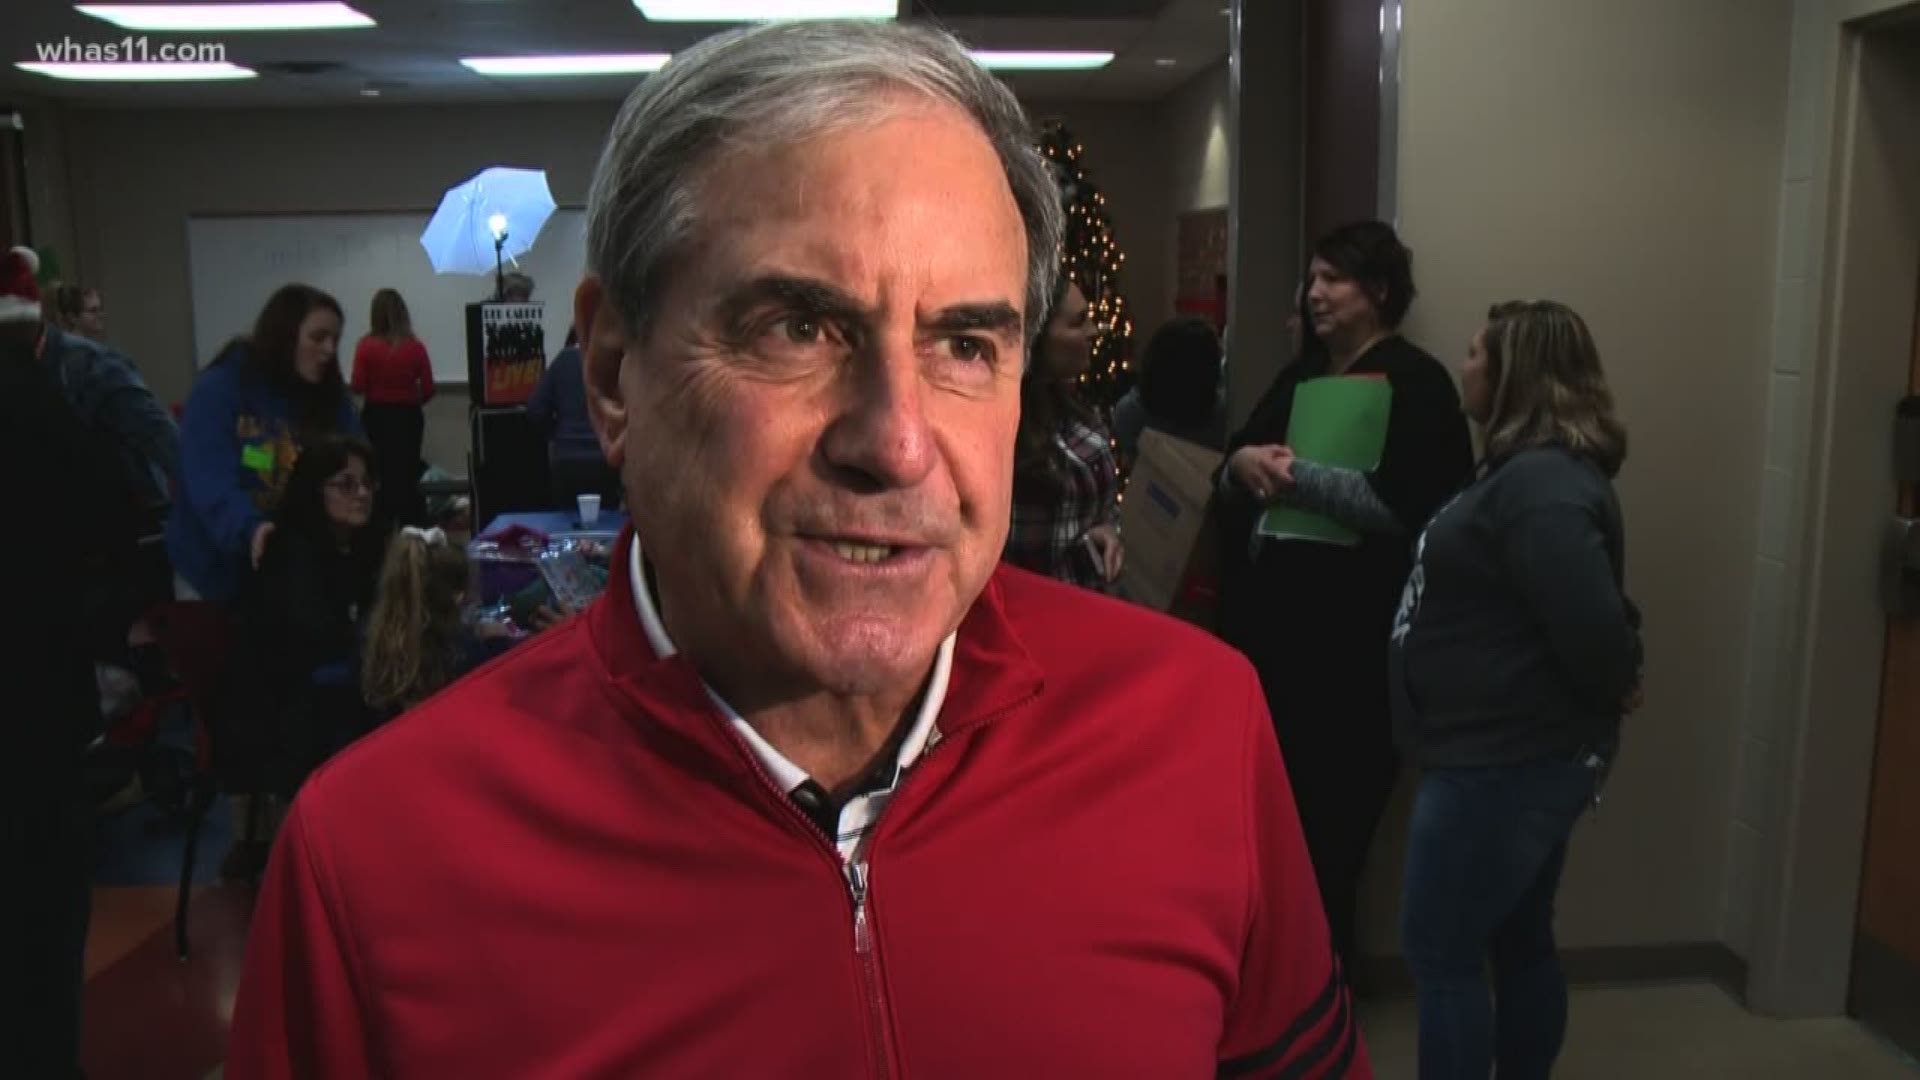 Congressman John Yarmuth enlisted the help of some local elementary school kids to make a difference